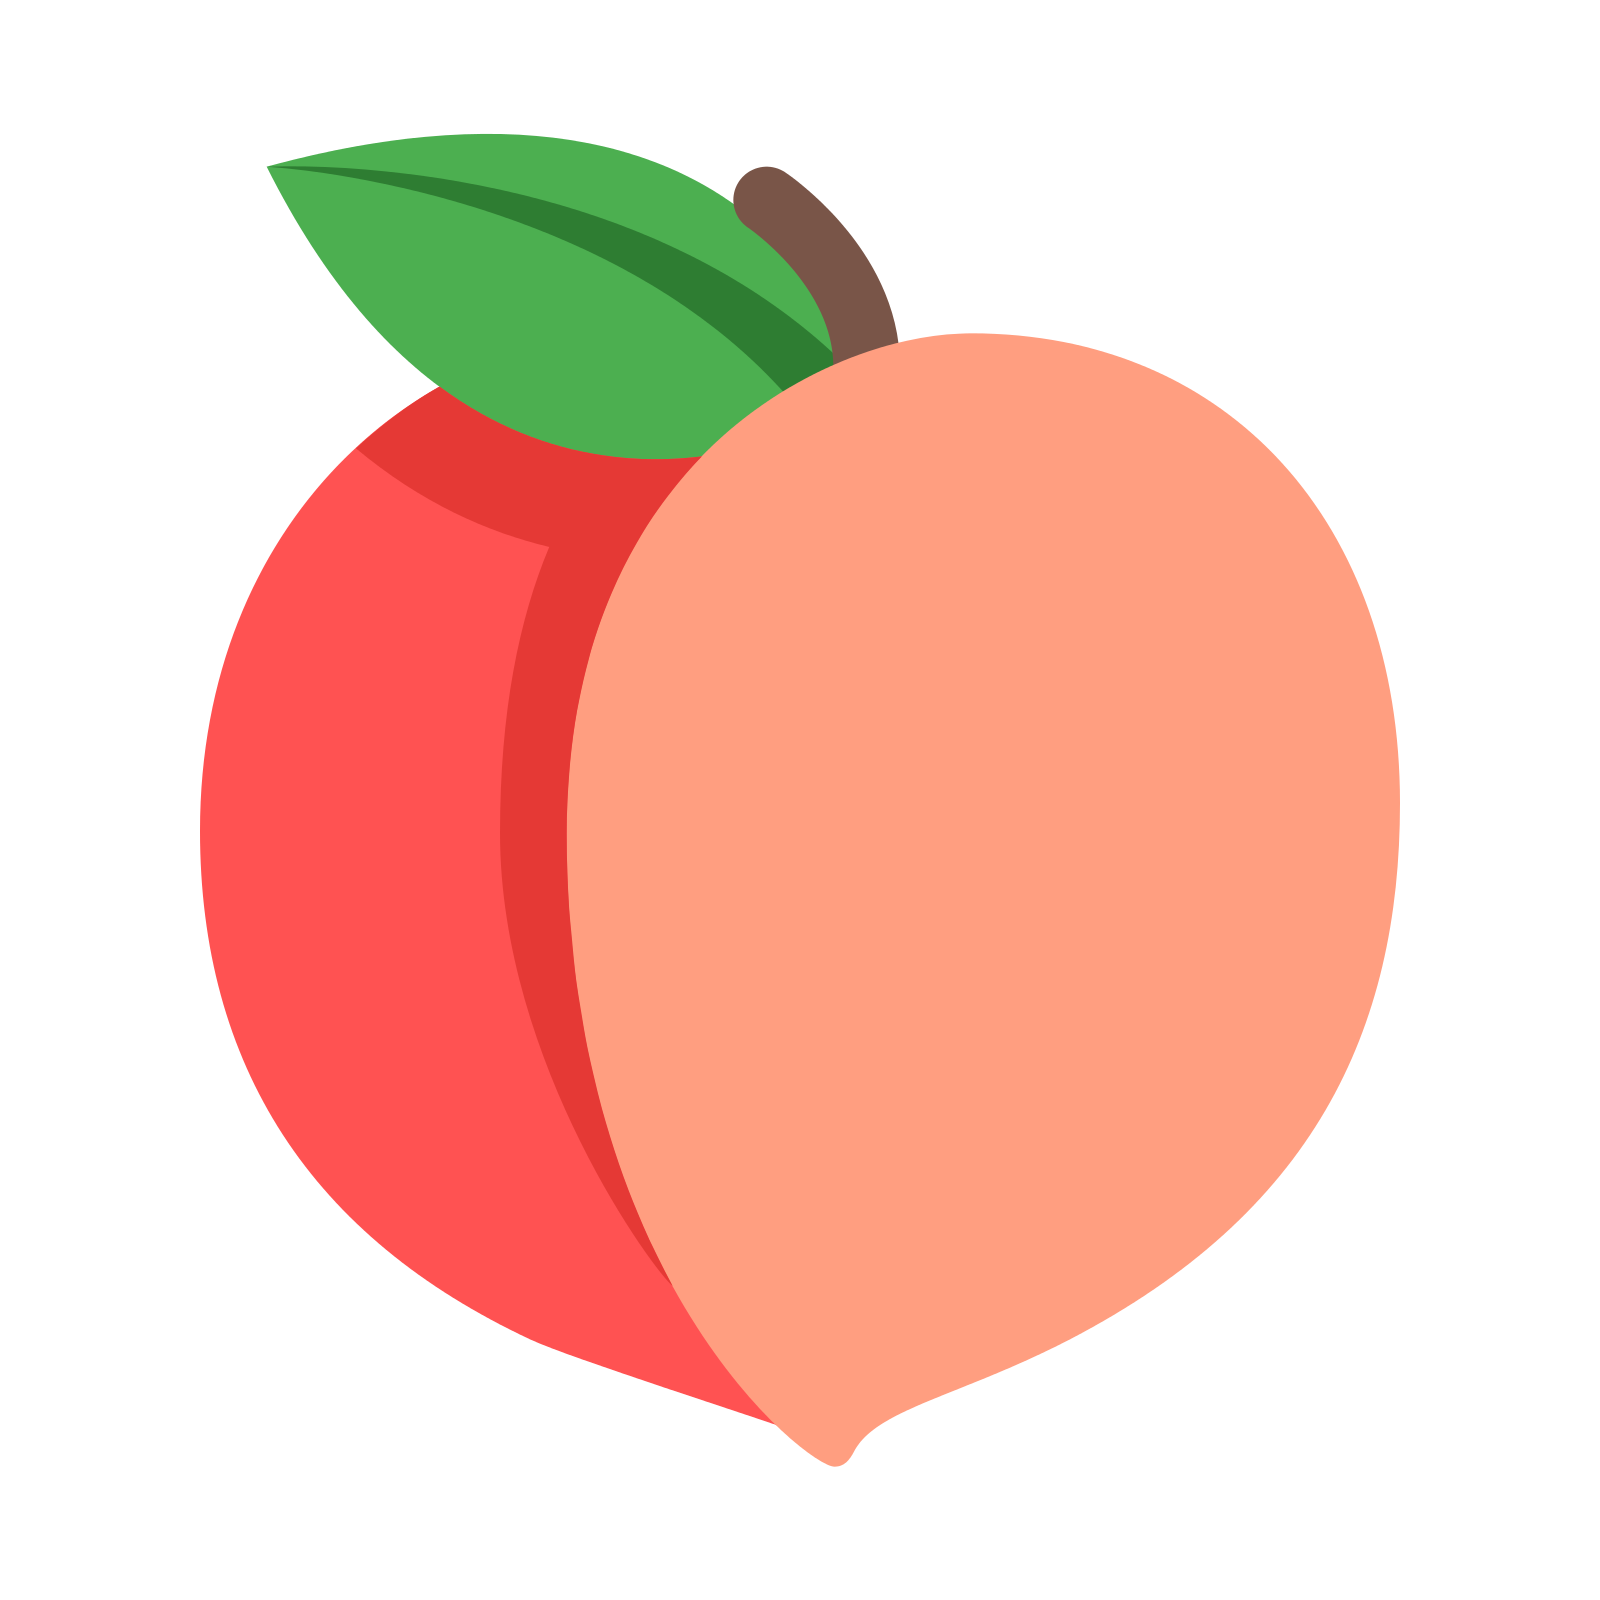 This Image Is Of A Peach. There Are Two Reversed And Connected Cu0027S That Make. Png 50 Px - Peach, Transparent background PNG HD thumbnail